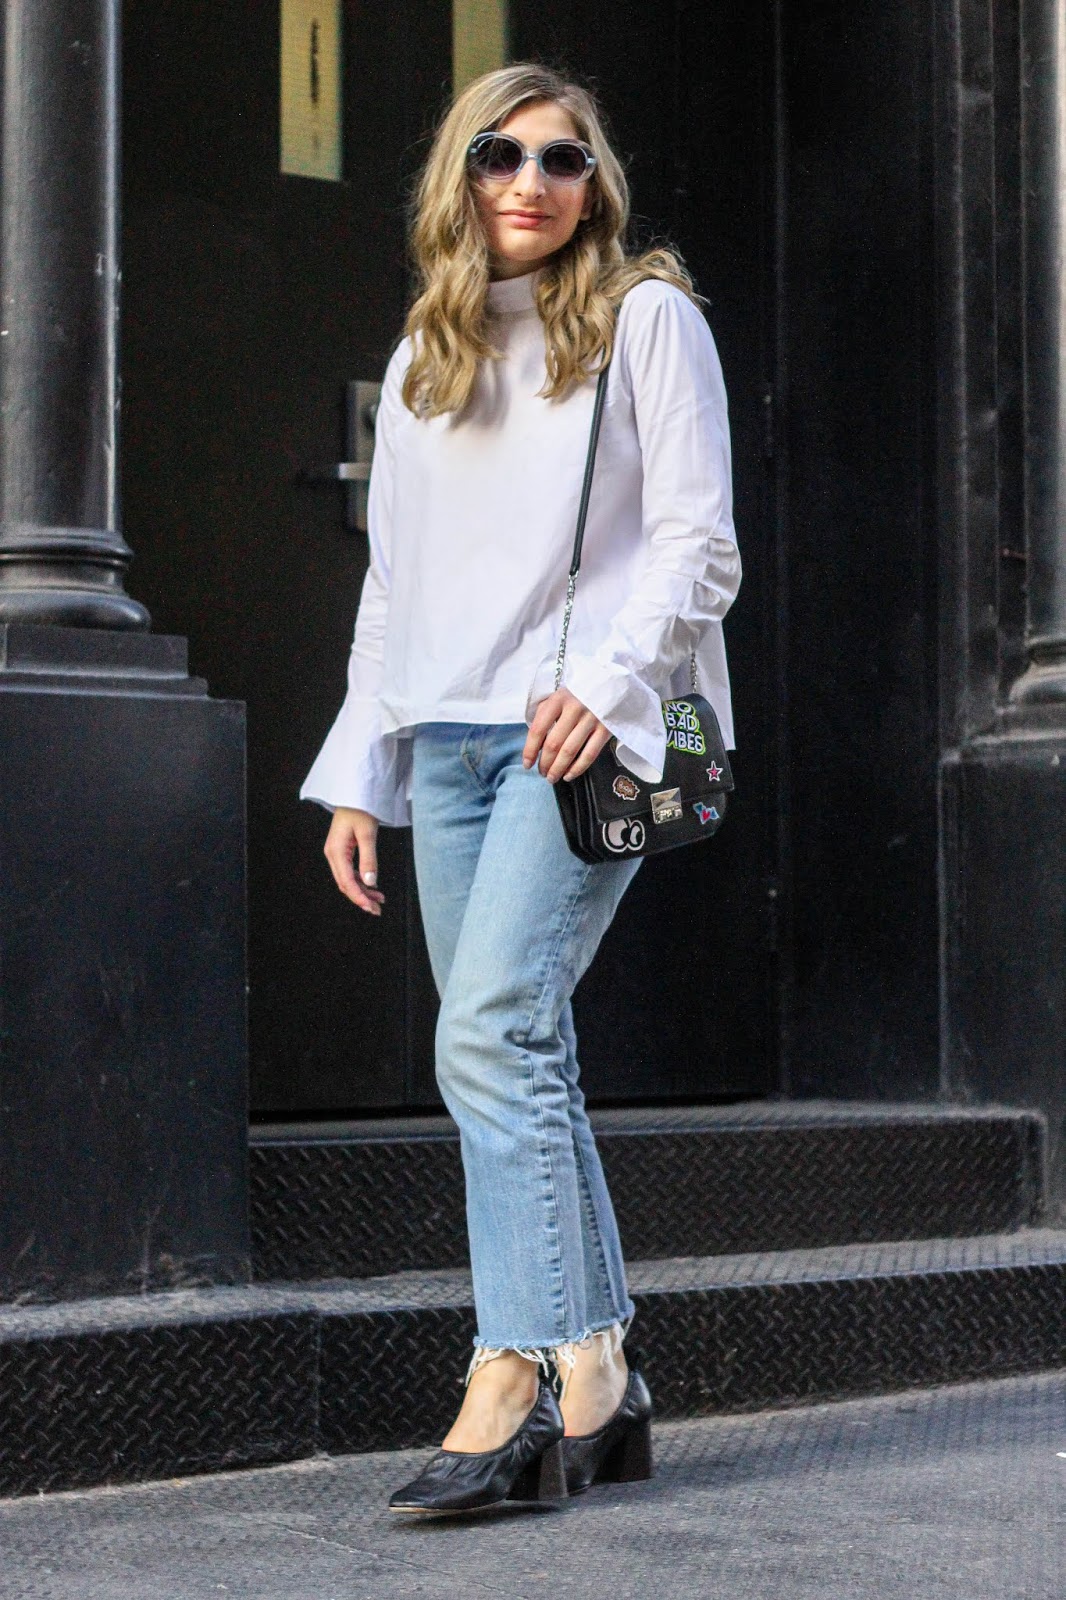 Styling Statement White Blouses — life according to francesca